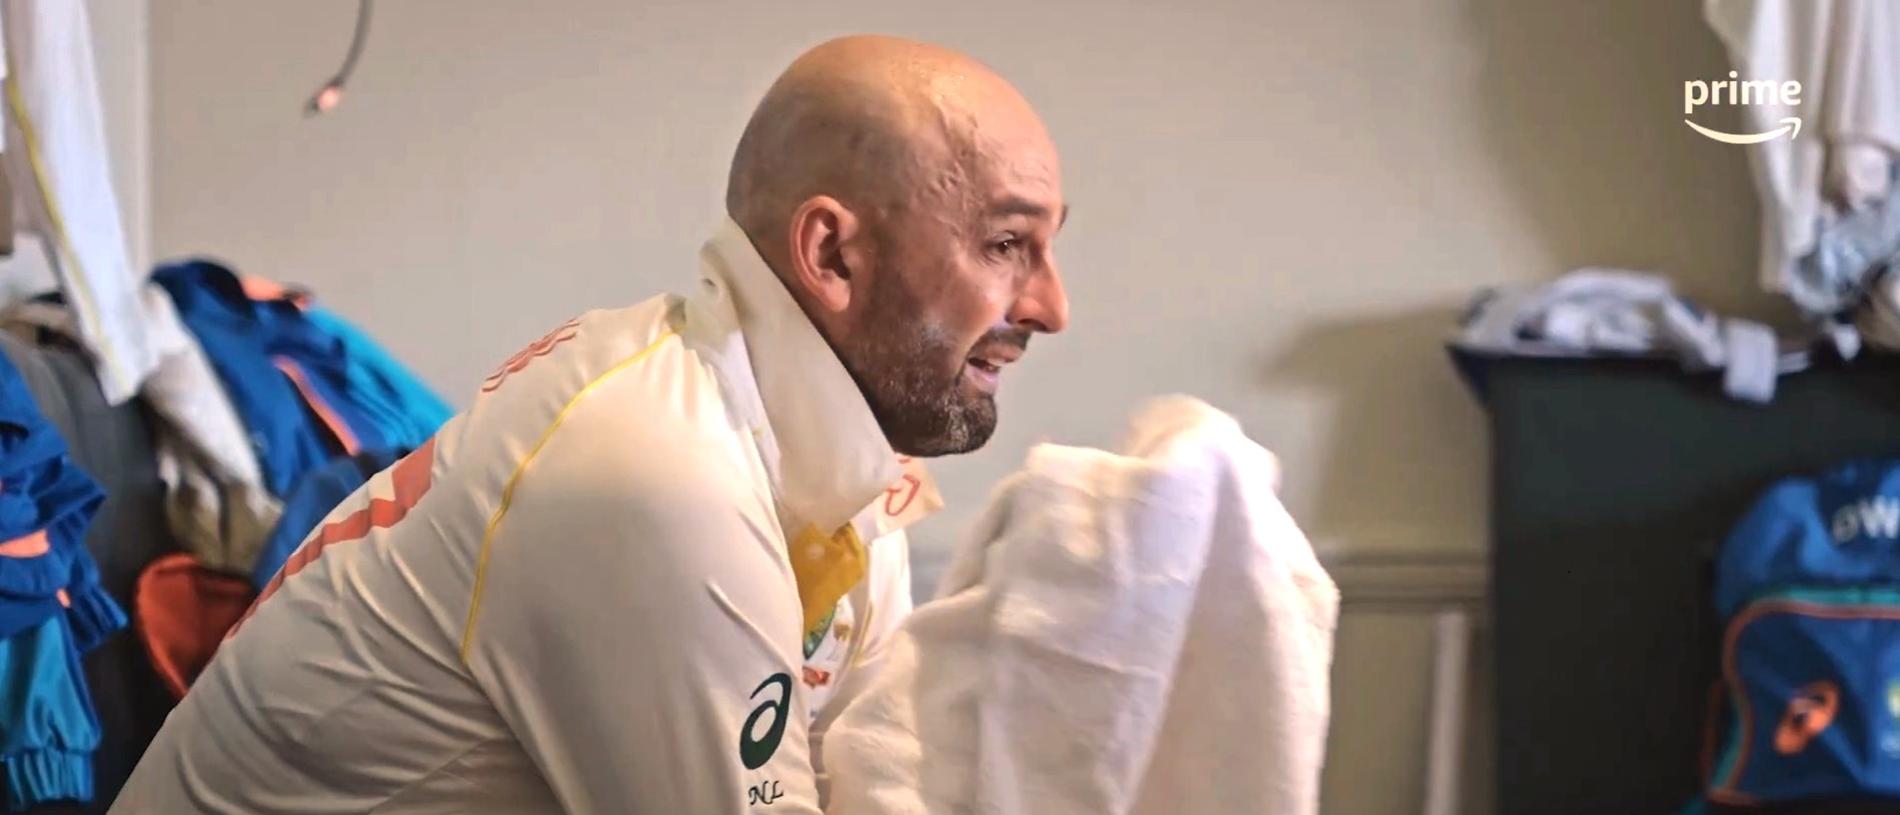 Nathan Lyon was in teers inside the Aussie dressing room. Photo: Amazon Prime Video.